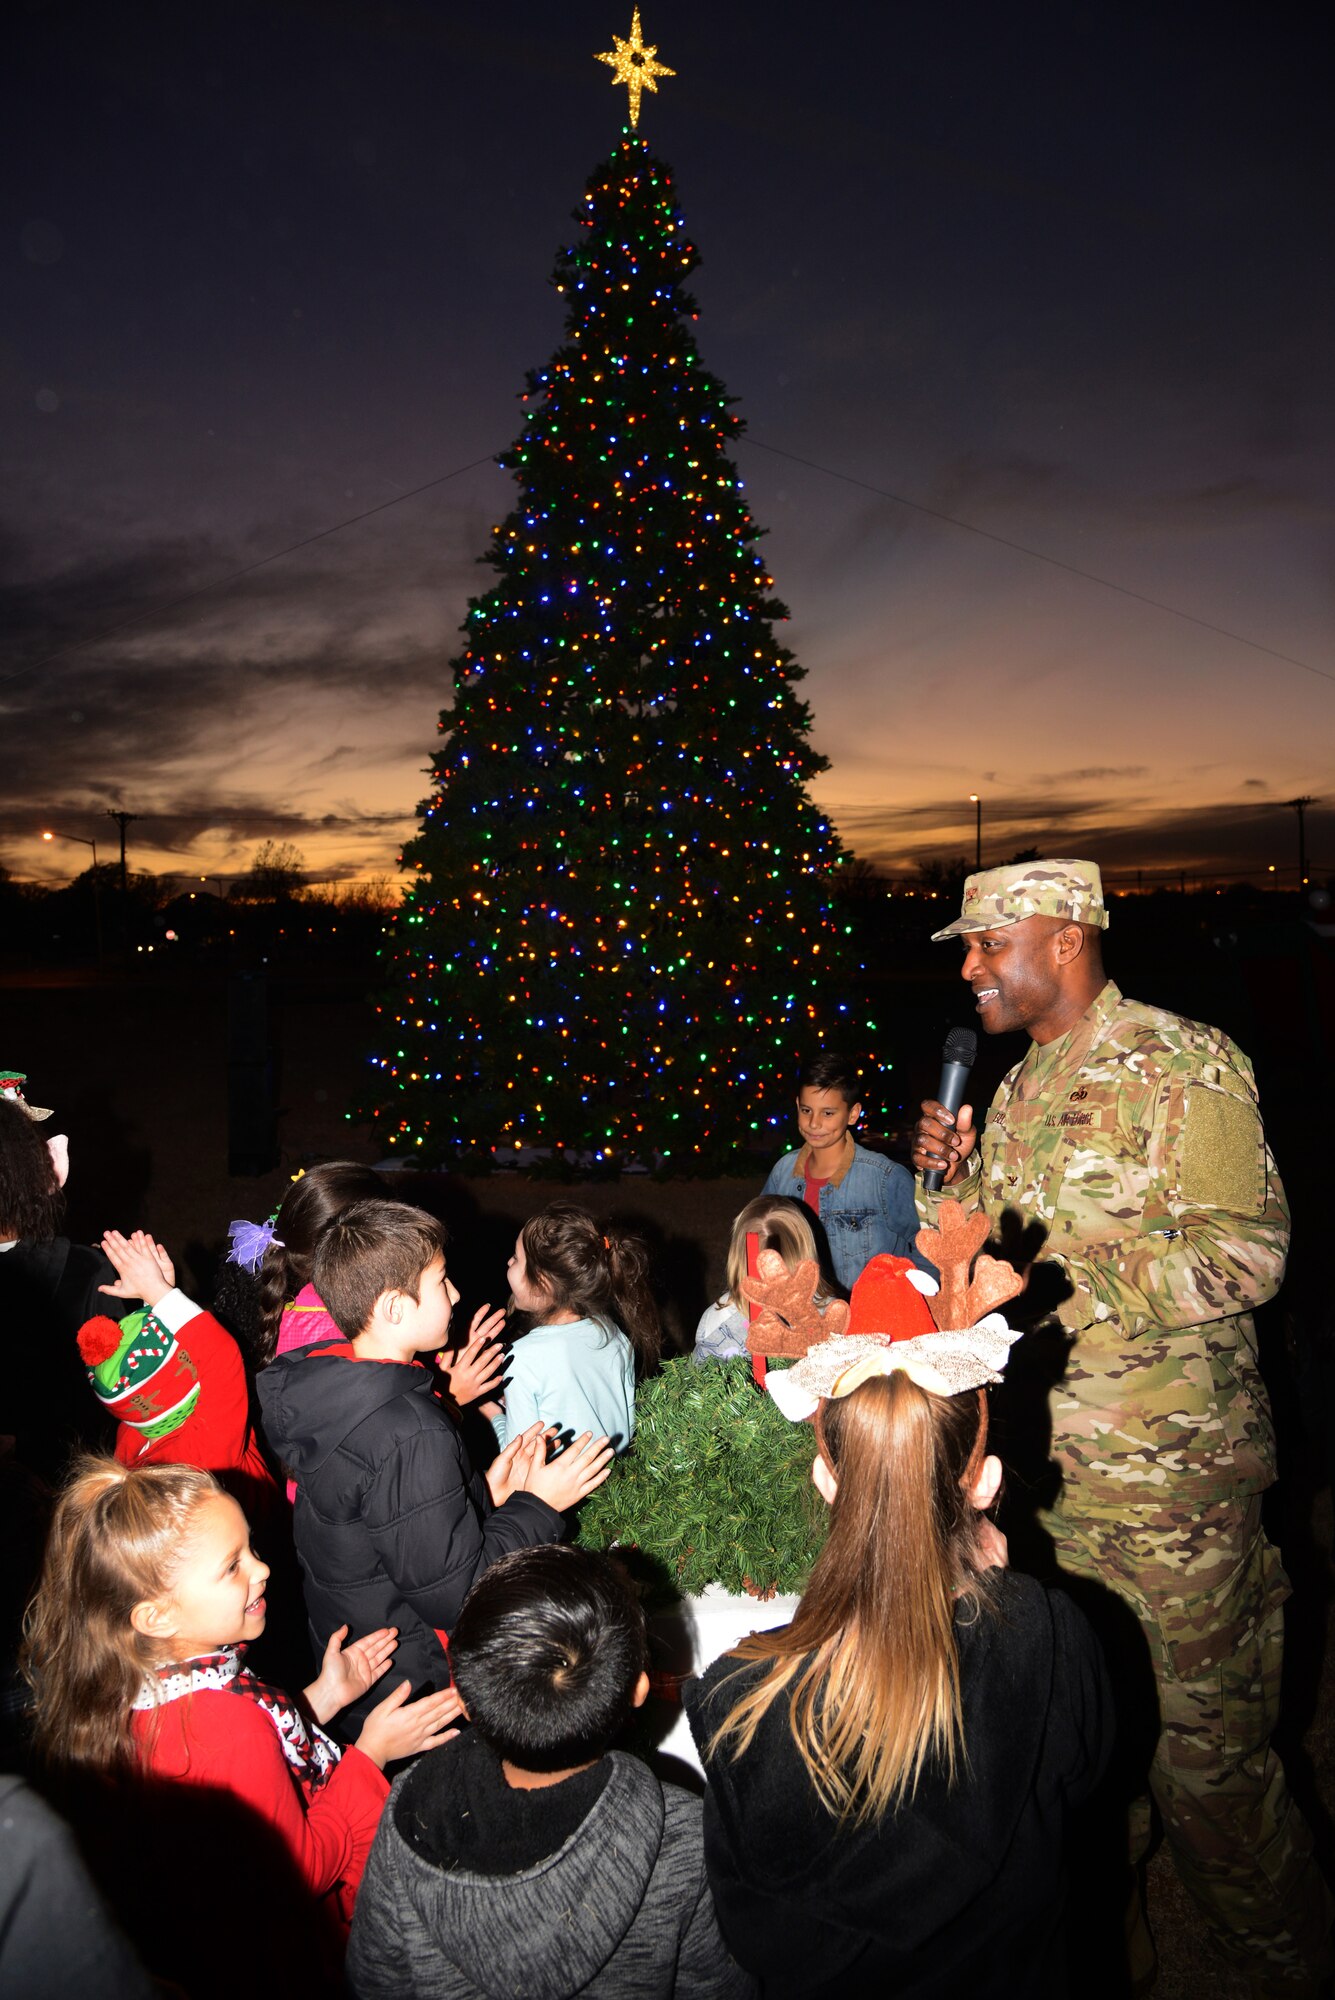 Tinker welcomed the holidays with their annual parade, tree lighting and celebration at the Tinker Club Nov. 28. The 72nd Force Support Squadron hosted Tinker families at the Tinker Club with a magical candy bar, face painting, photos with Santa and holiday dancing from children in Youth Center programs. 72nd Air Base Wing Commander Col. Kenyon Bell welcomed the families and encouraged everyone to believe in the spirit of the season and, with assistance from a handful of willing participants, lit the brand new tree in front of the Club.